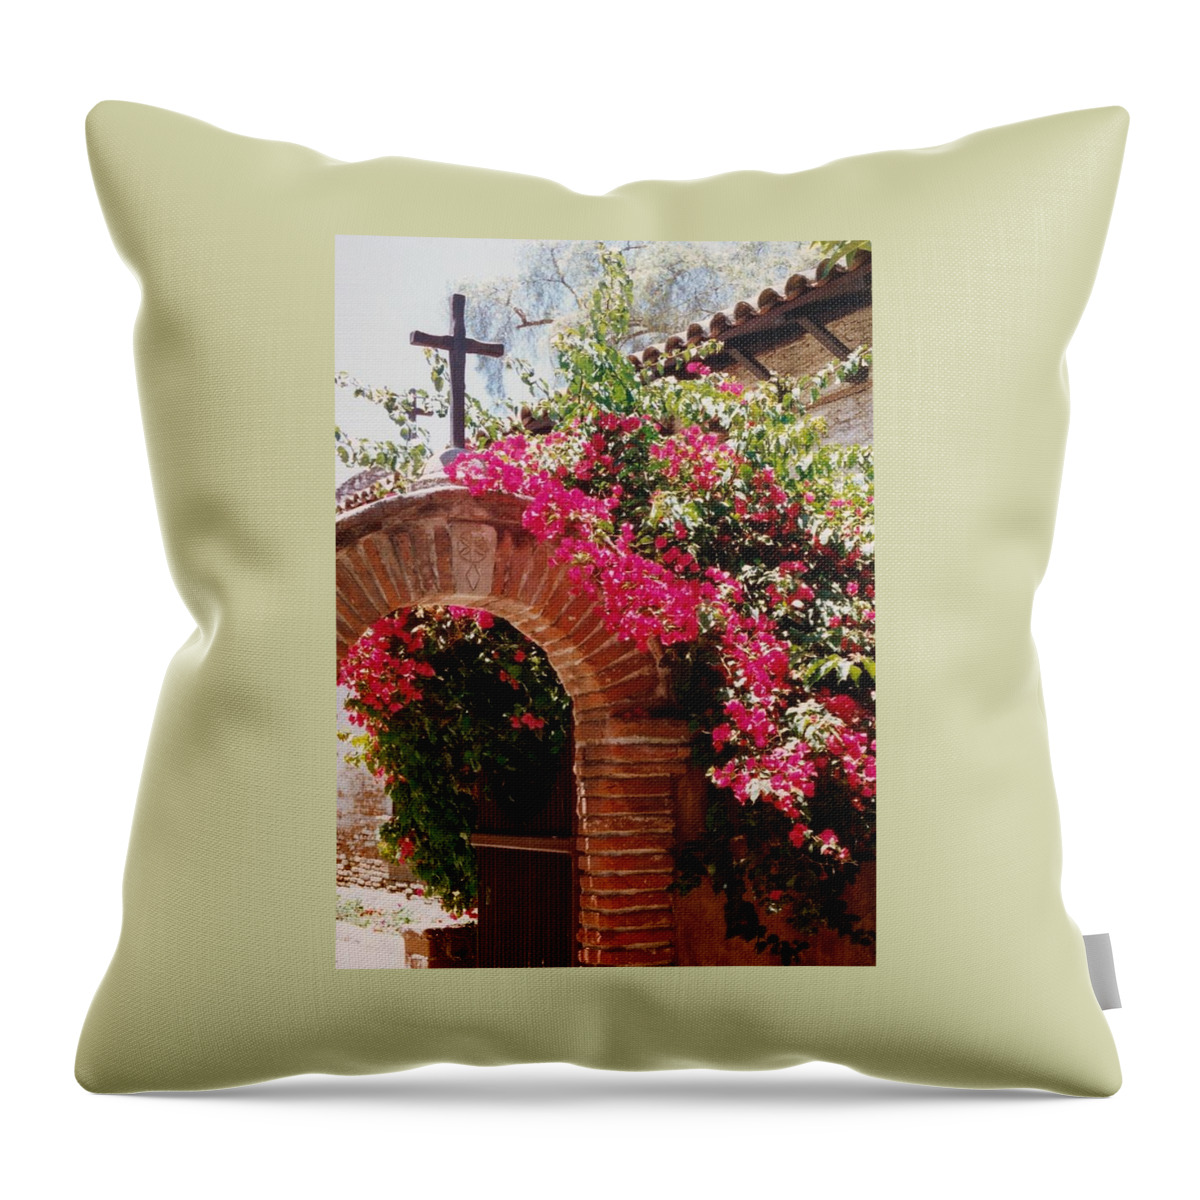 Mission Throw Pillow featuring the photograph Mission Series I by Jacqueline Russell